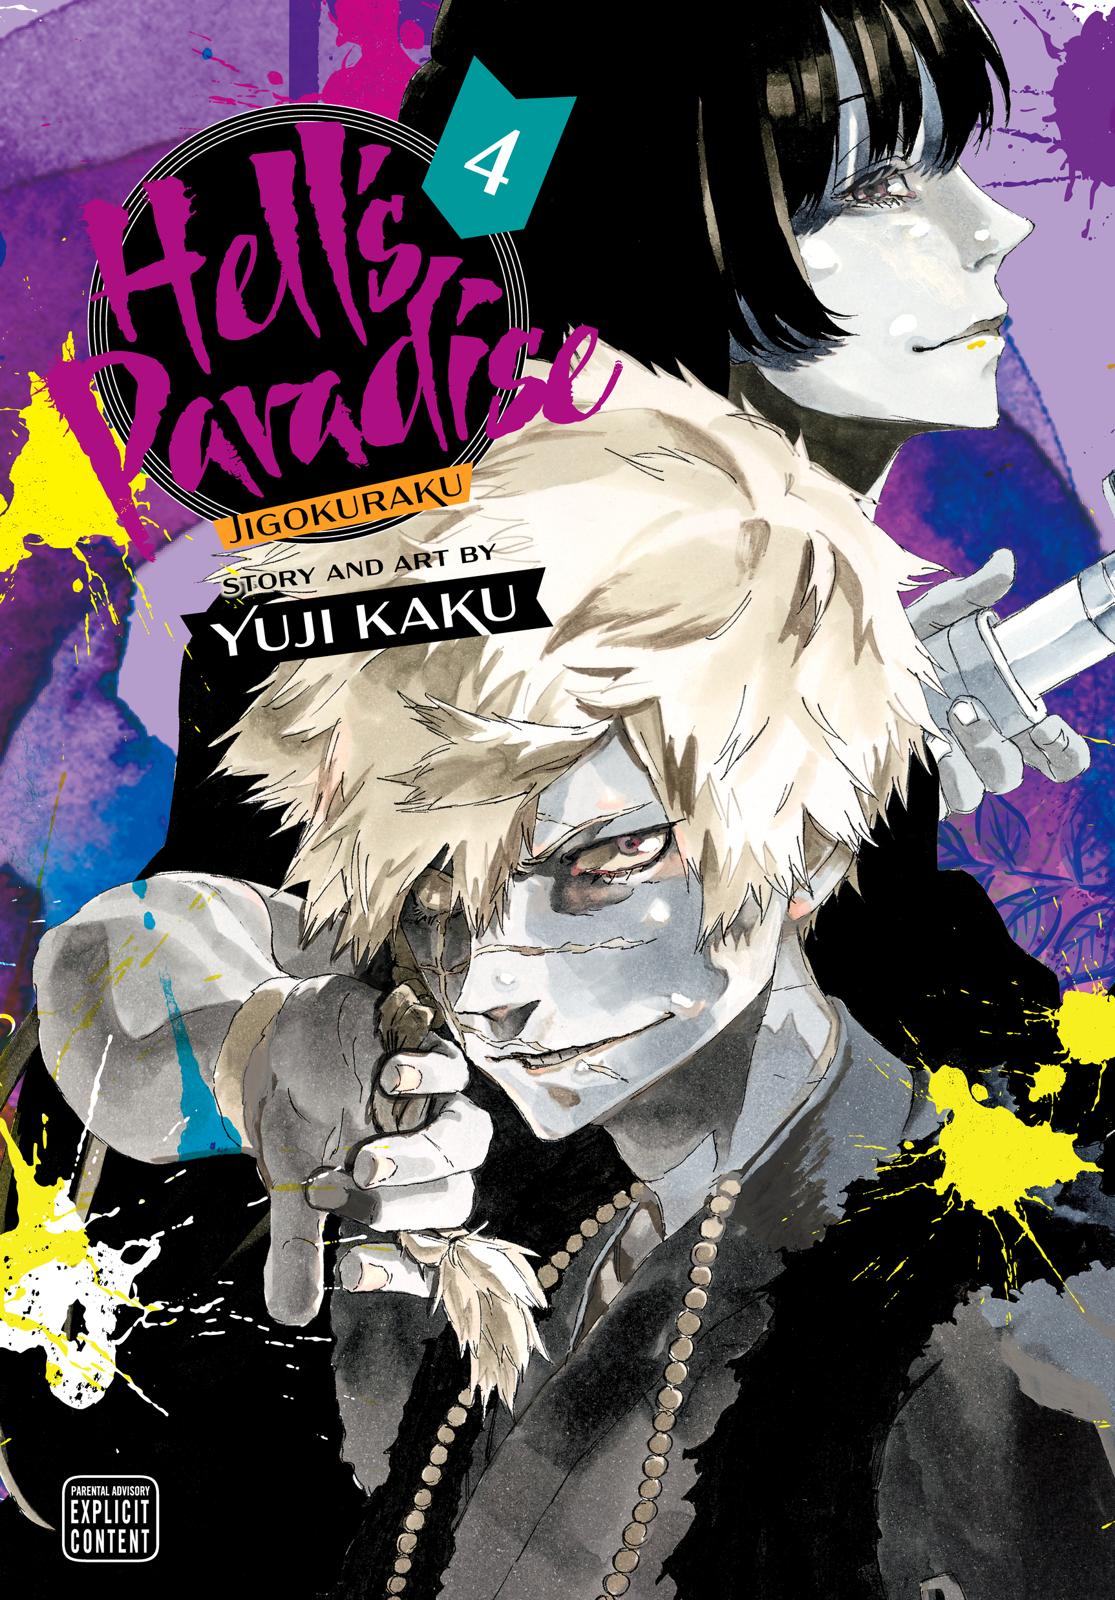 ART] Looking for a new shonen series? Try Hell's Paradise